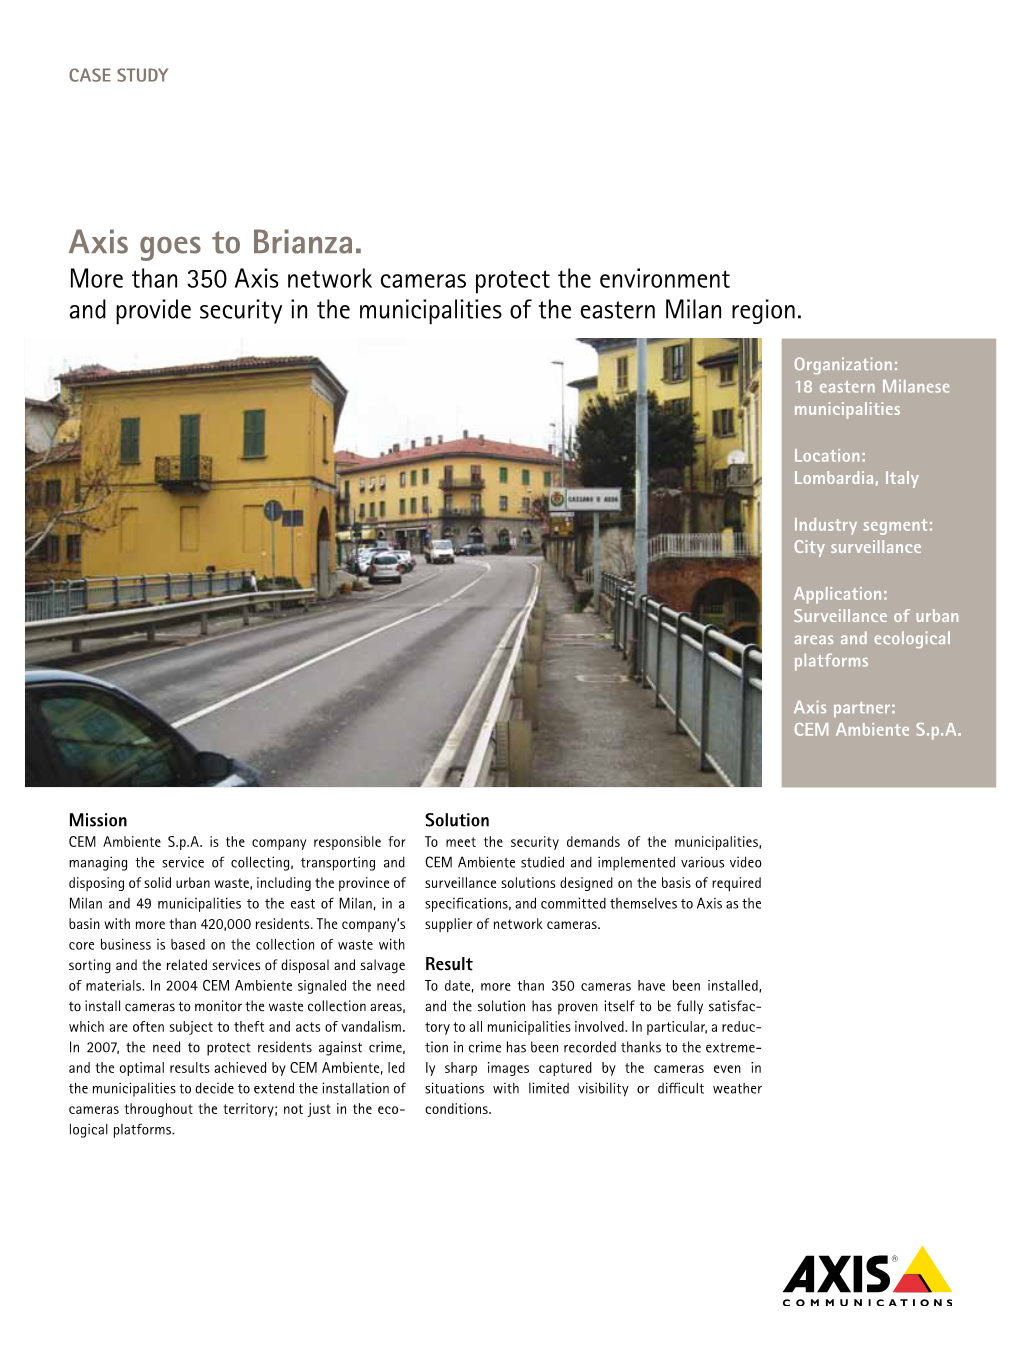 Axis Goes to Brianza. More Than 350 Axis Network Cameras Protect the Environment and Provide Security in the Municipalities of the Eastern Milan Region